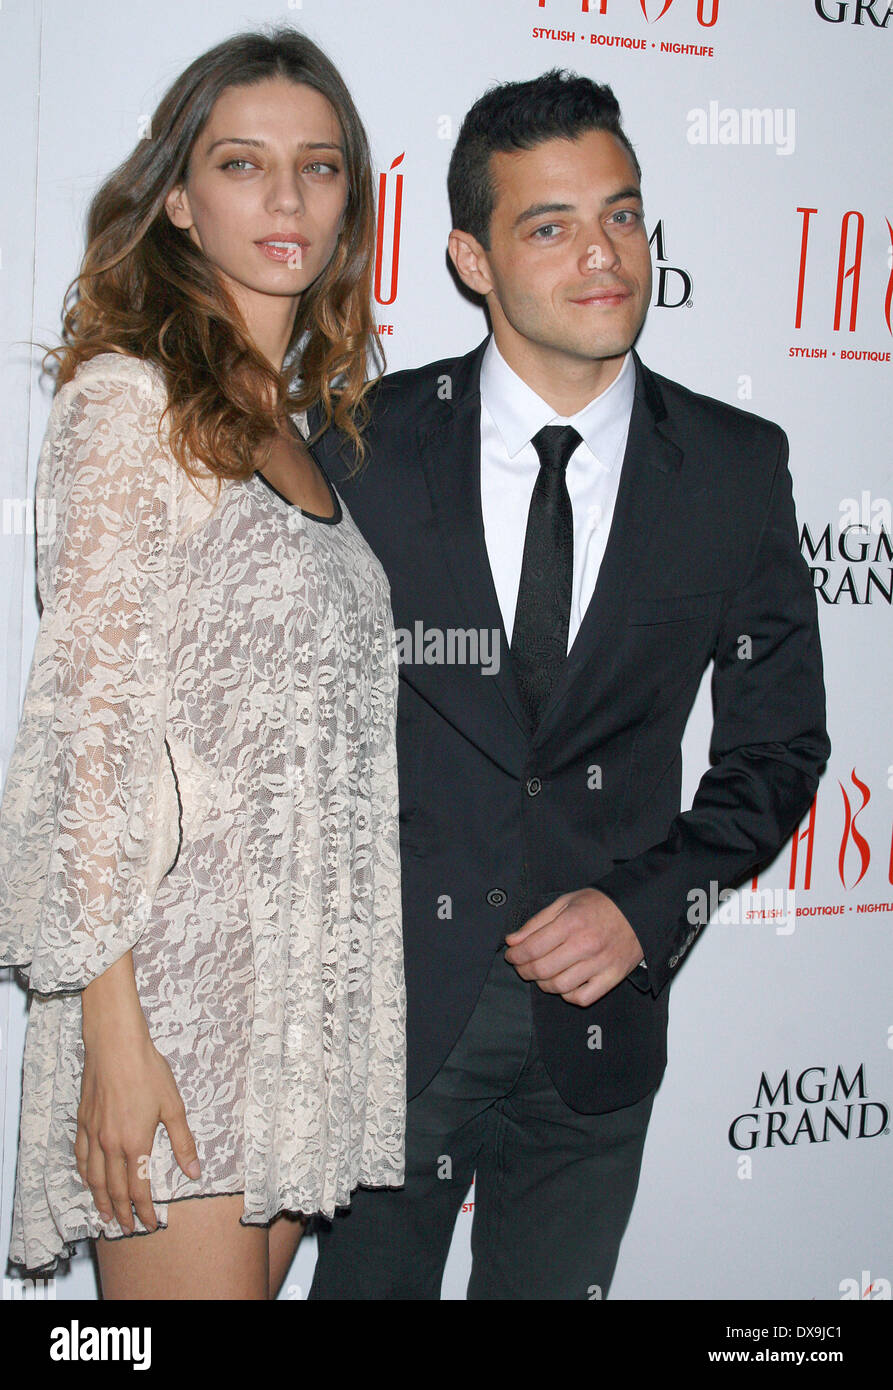 Angela Sarafyan and Rami Malek from the "Twilight Saga, Breaking Dawn part  2" host an evening at Tabu Nightclub inside MGM Grand Hotel and Casino to  celebrate the films opening weekend Las